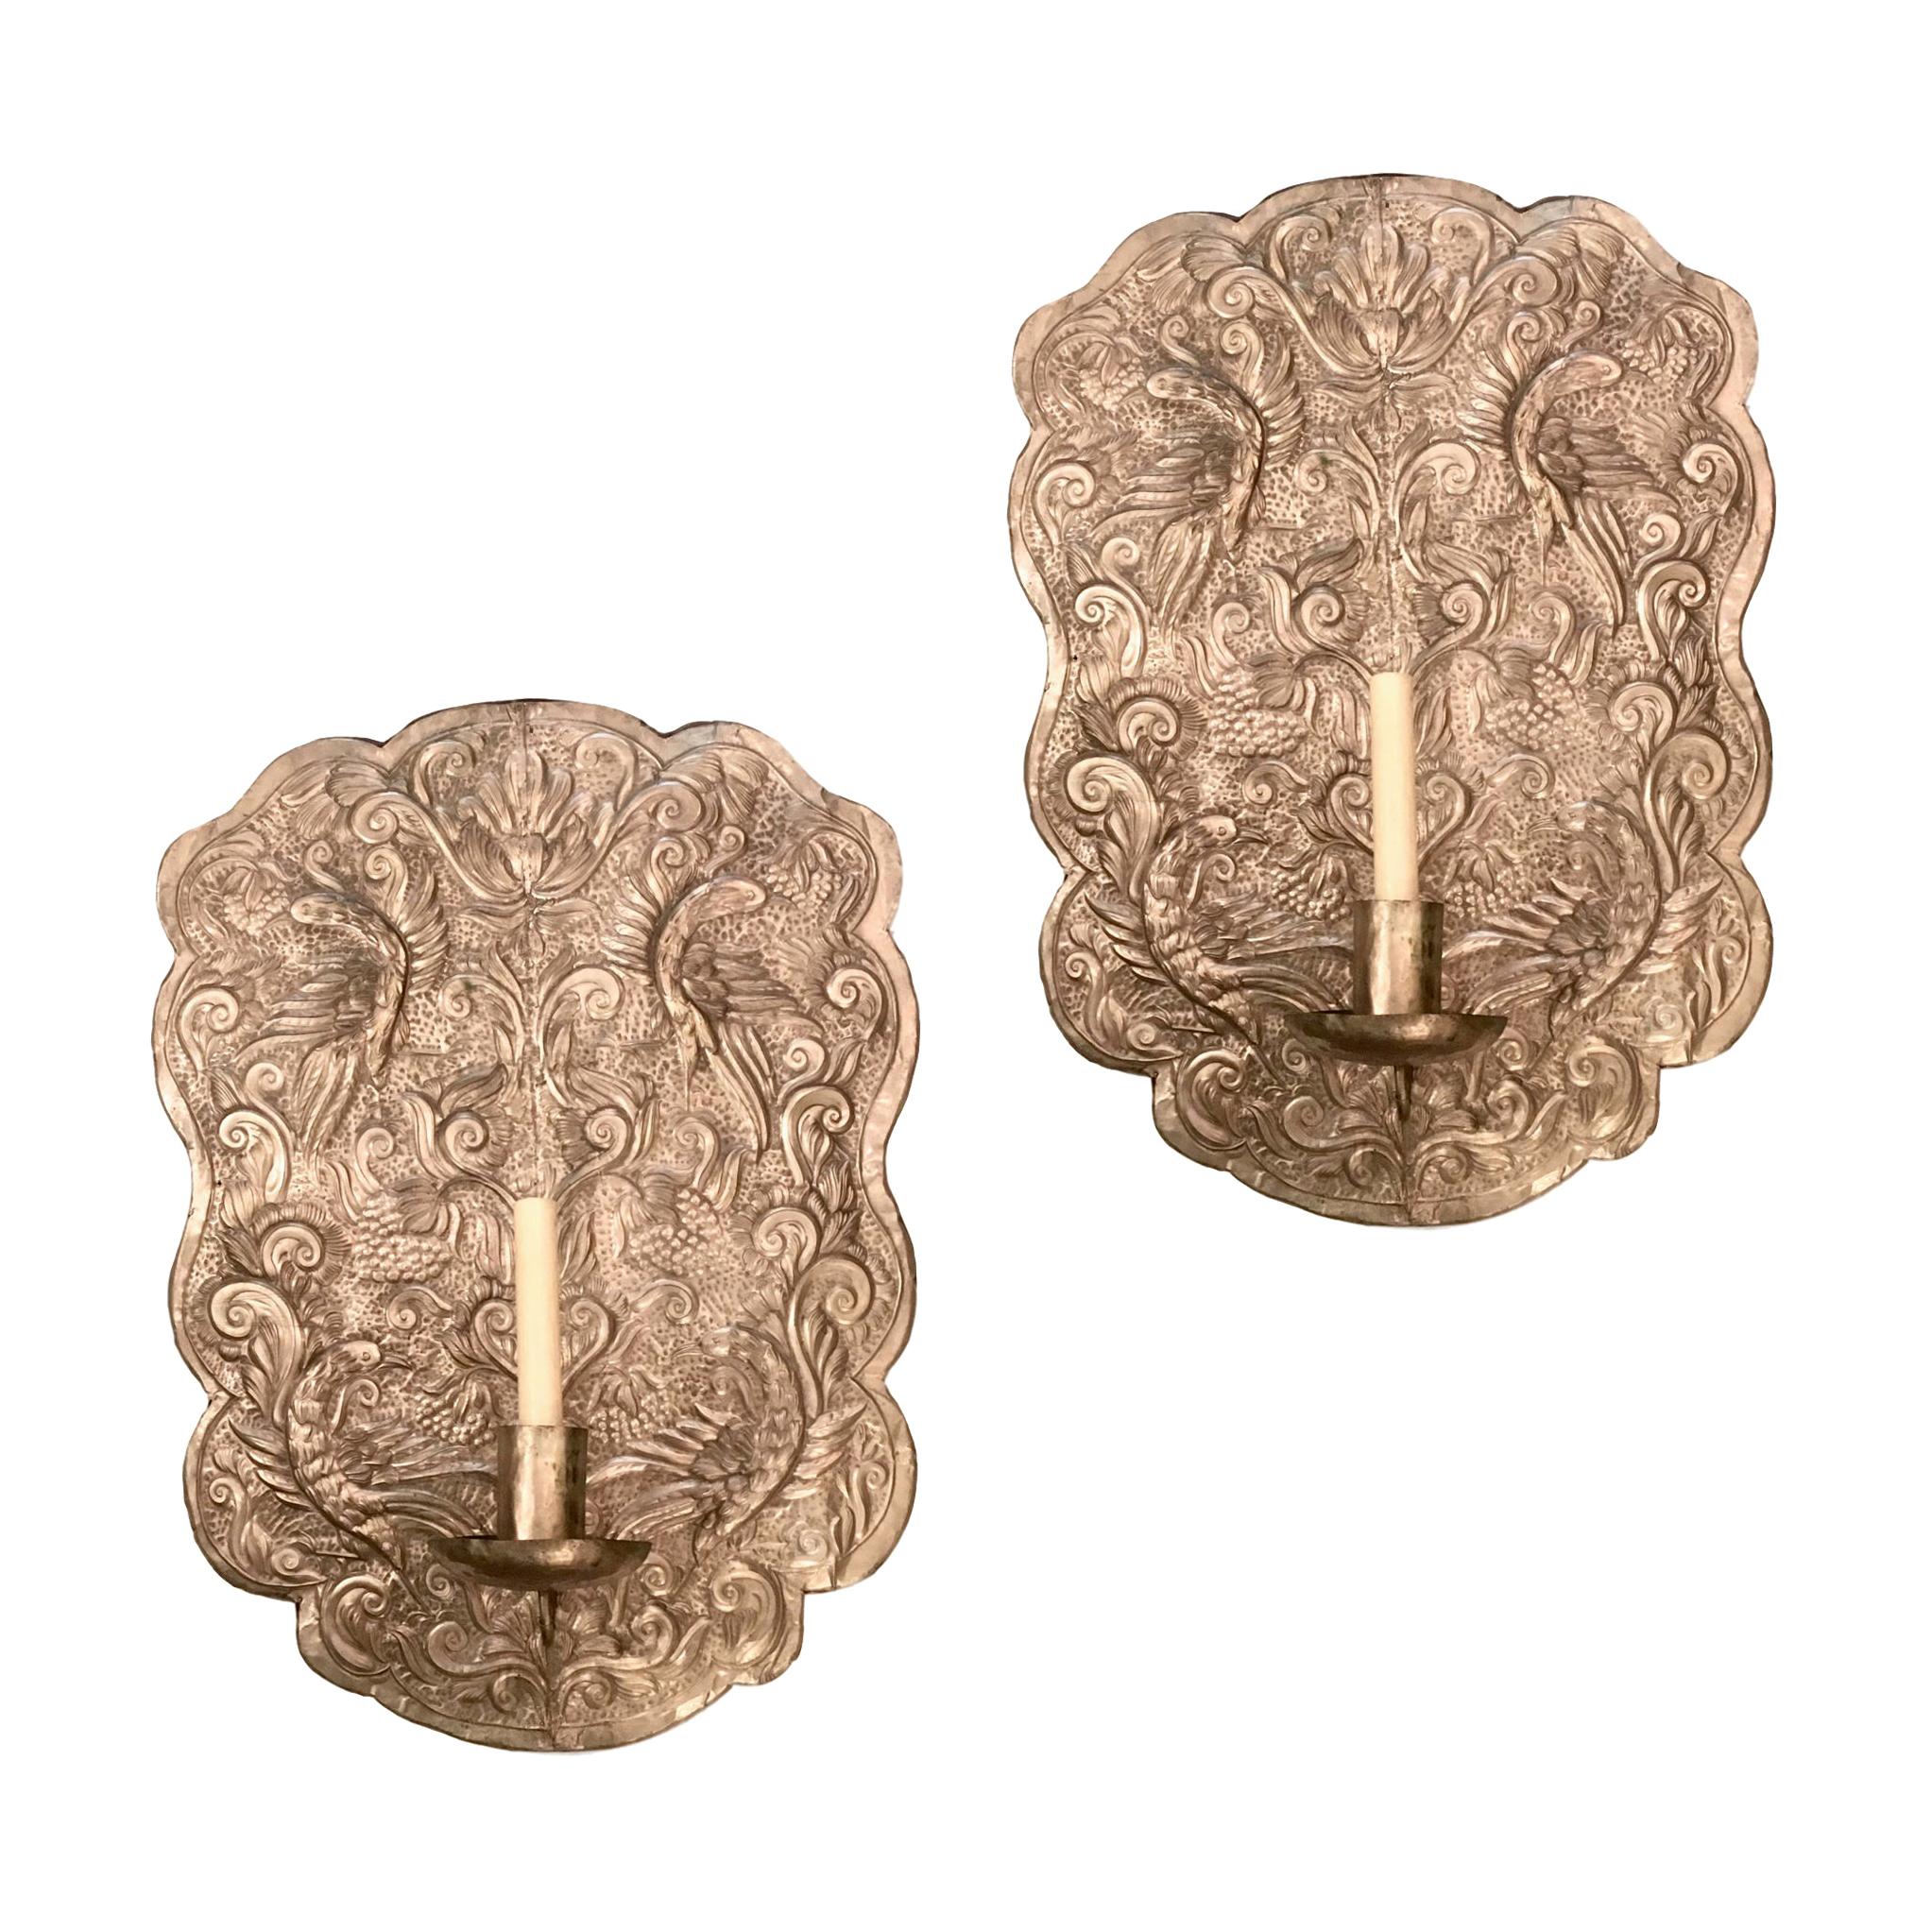 Set of Repousse' Silver-Plated Sconces, Sold in Pairs